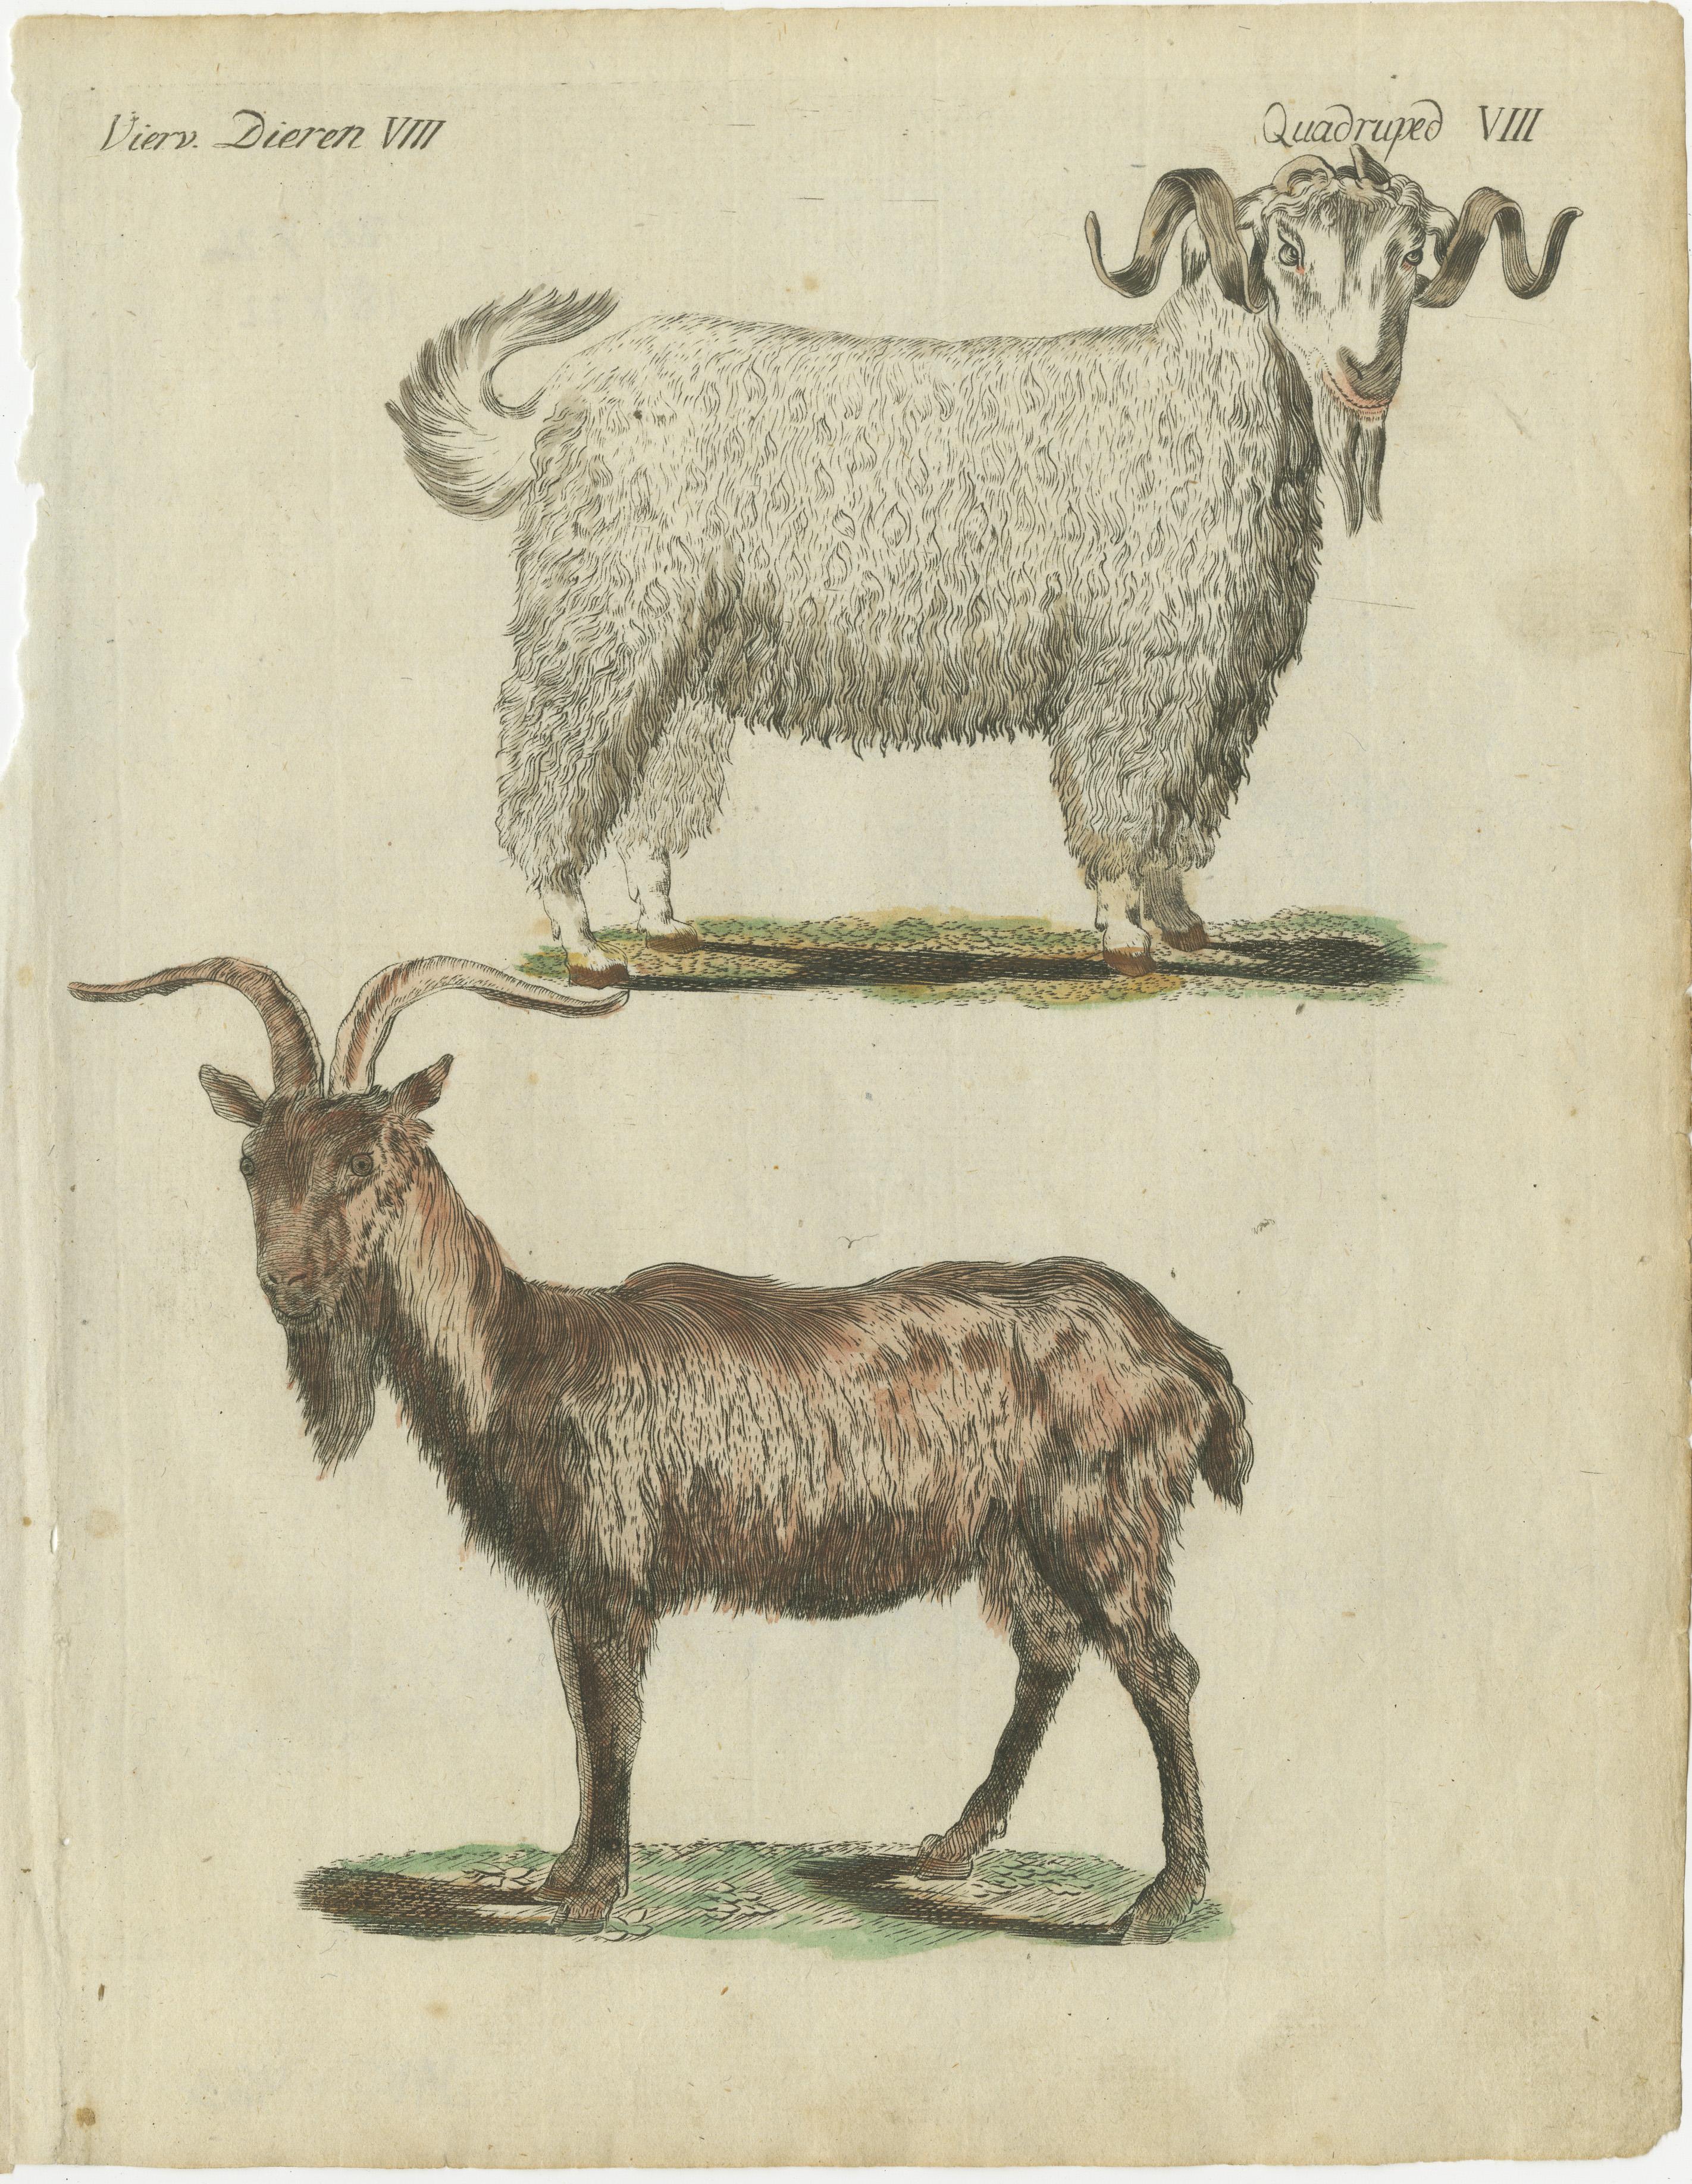 Original antique print of a goat and Angora goat (or Ankara). This engraved print originates from a very rare unknown Dutch work. The plates are similar to the plates in the famous German work: ‘Bilderbuch fur Kinder' by F.J. Bertuch, published